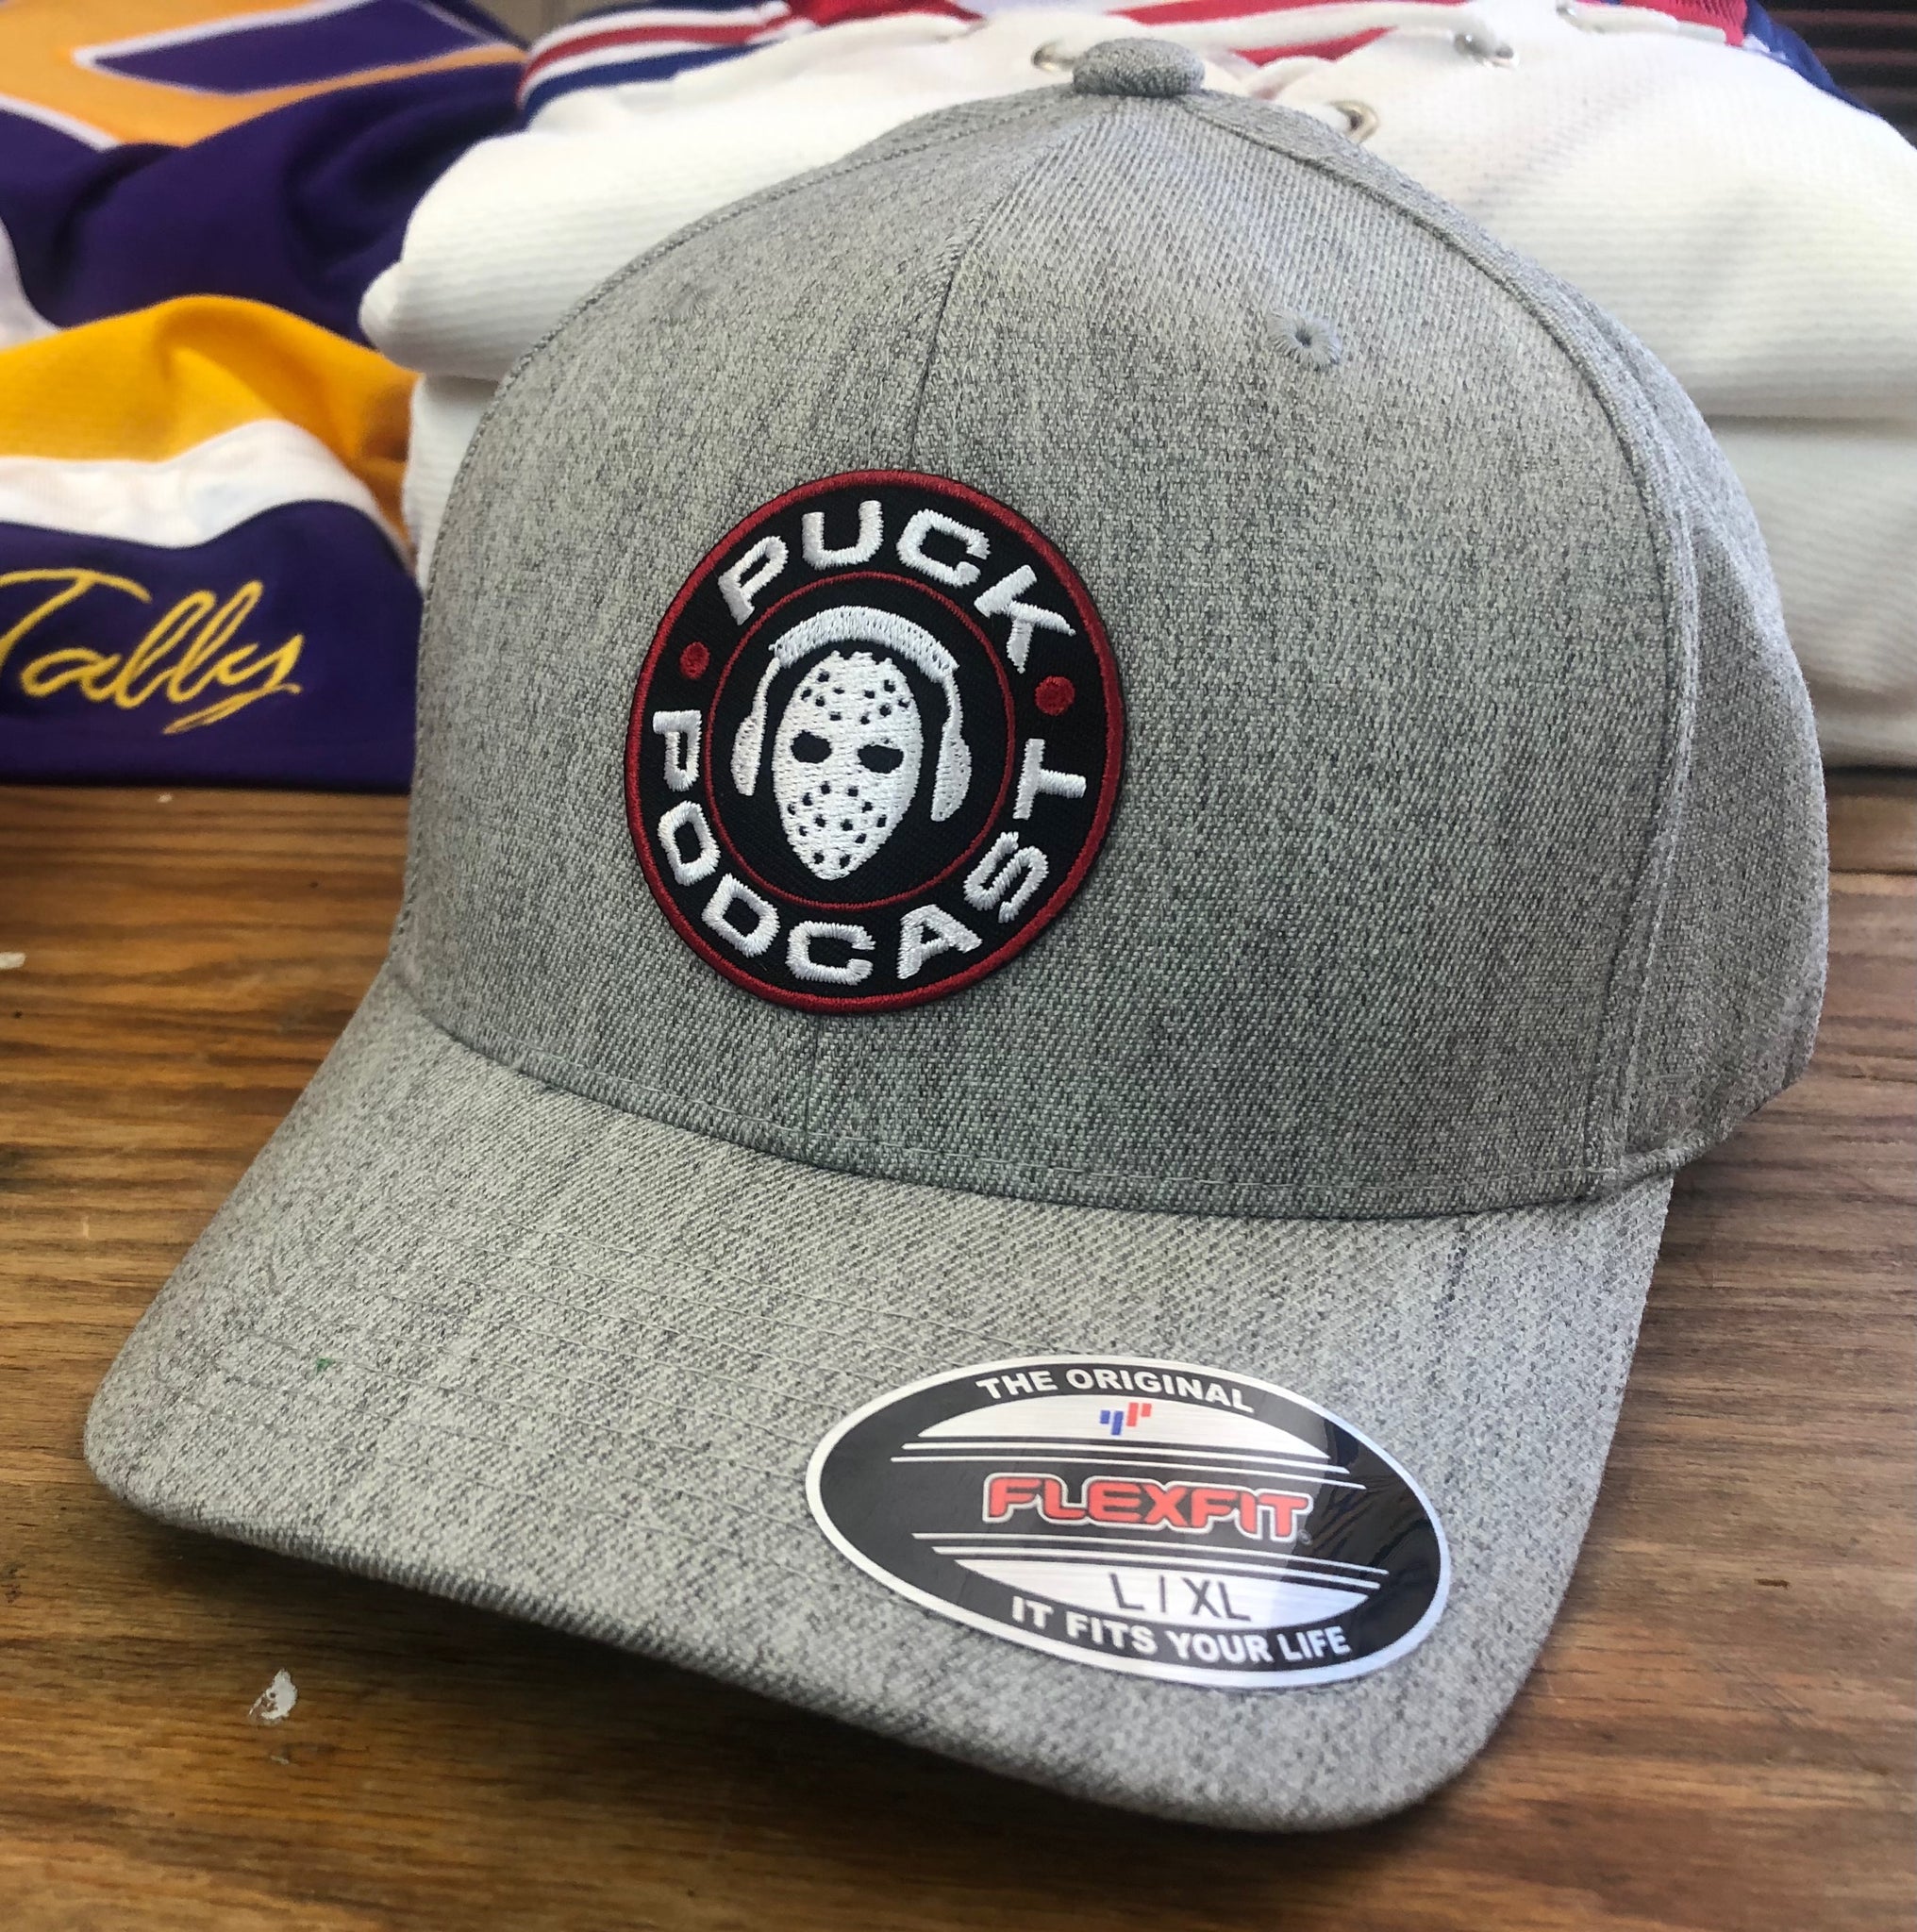 Flex-Fit Hat with the Puck Hockey Jerseys (Heather) logo crest – $39 Tally Podcast 